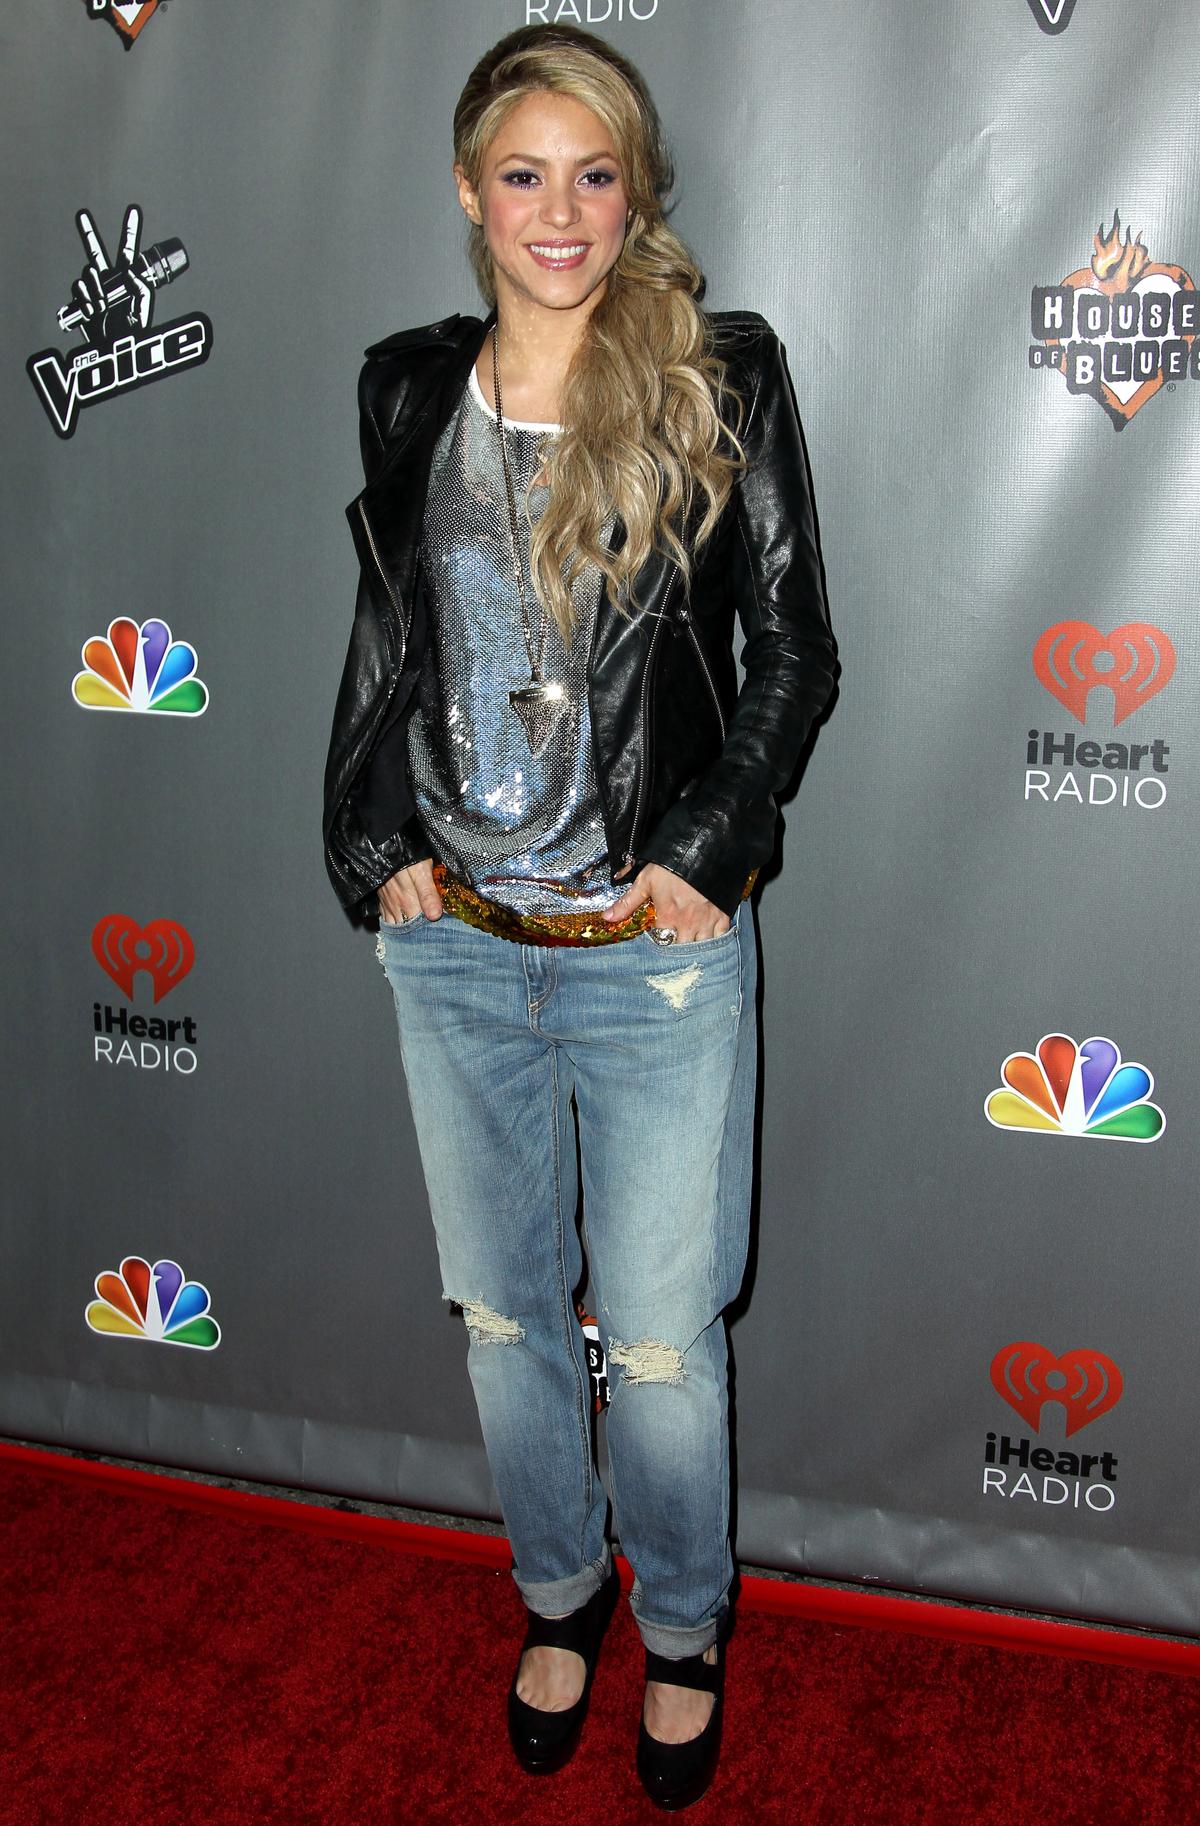 Shakira arrives at "The Voice" season 4 red carpet event at the House of Blues in Los Angeles, California, on May 8, 2013. (Photo by Matt Sayles/Invision/AP)